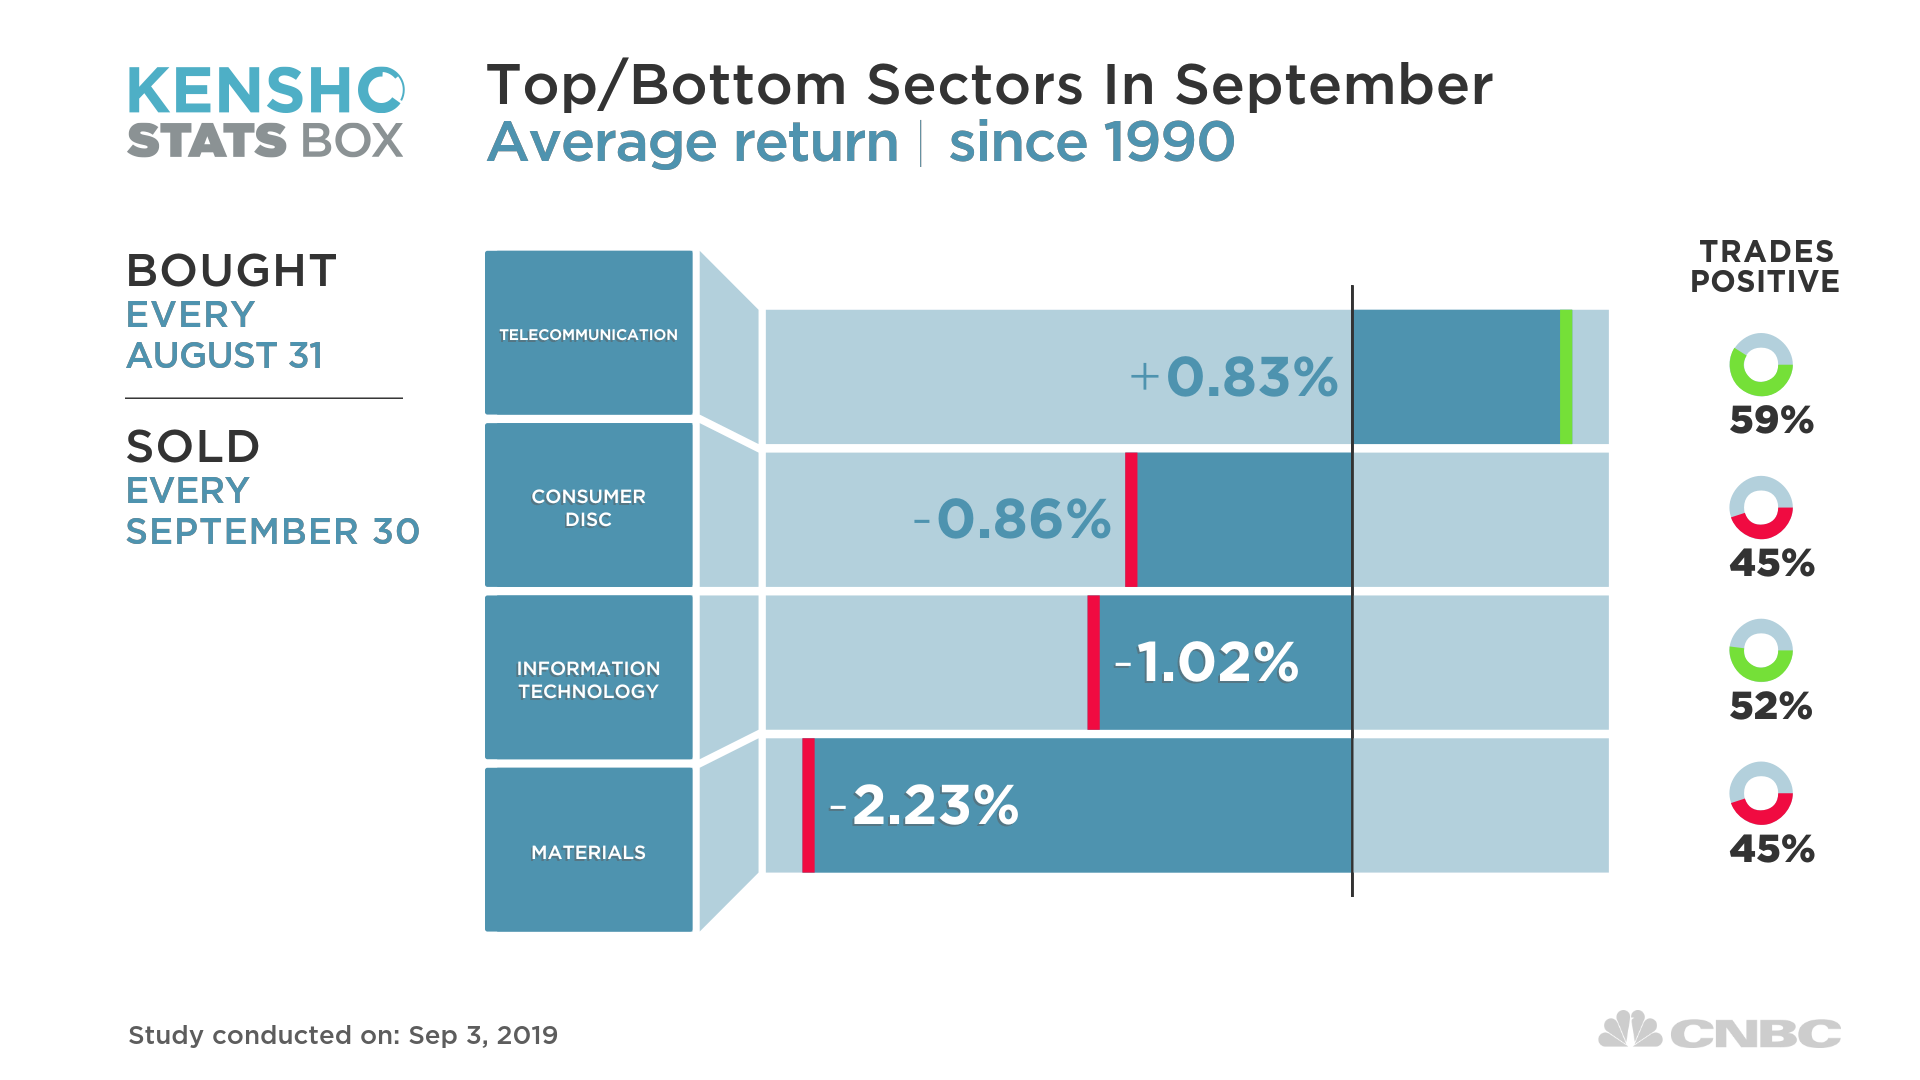 These are the S&P 500 sectors that fare best in tough September